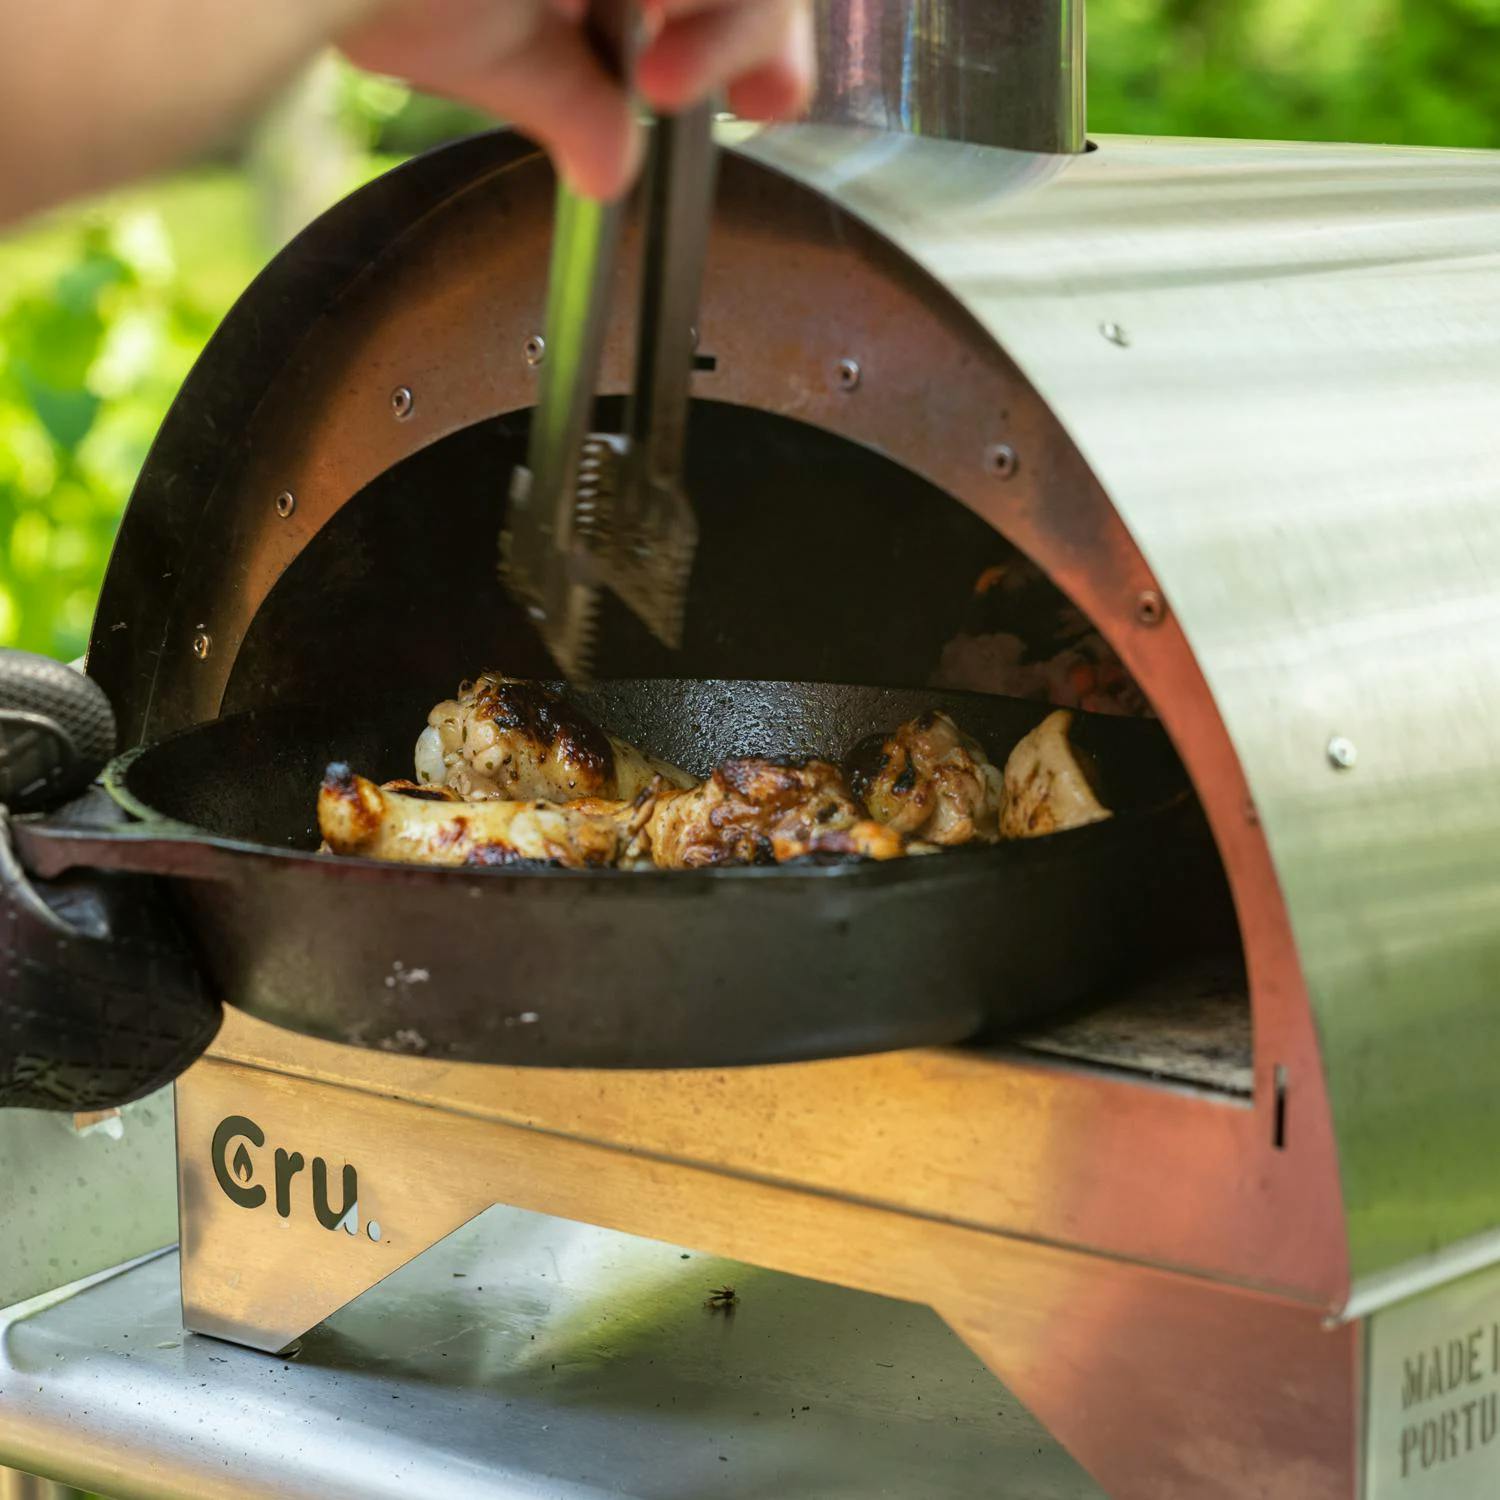 Cru Ovens Model 30 Portable Outdoor Wood-Fired Pizza Oven